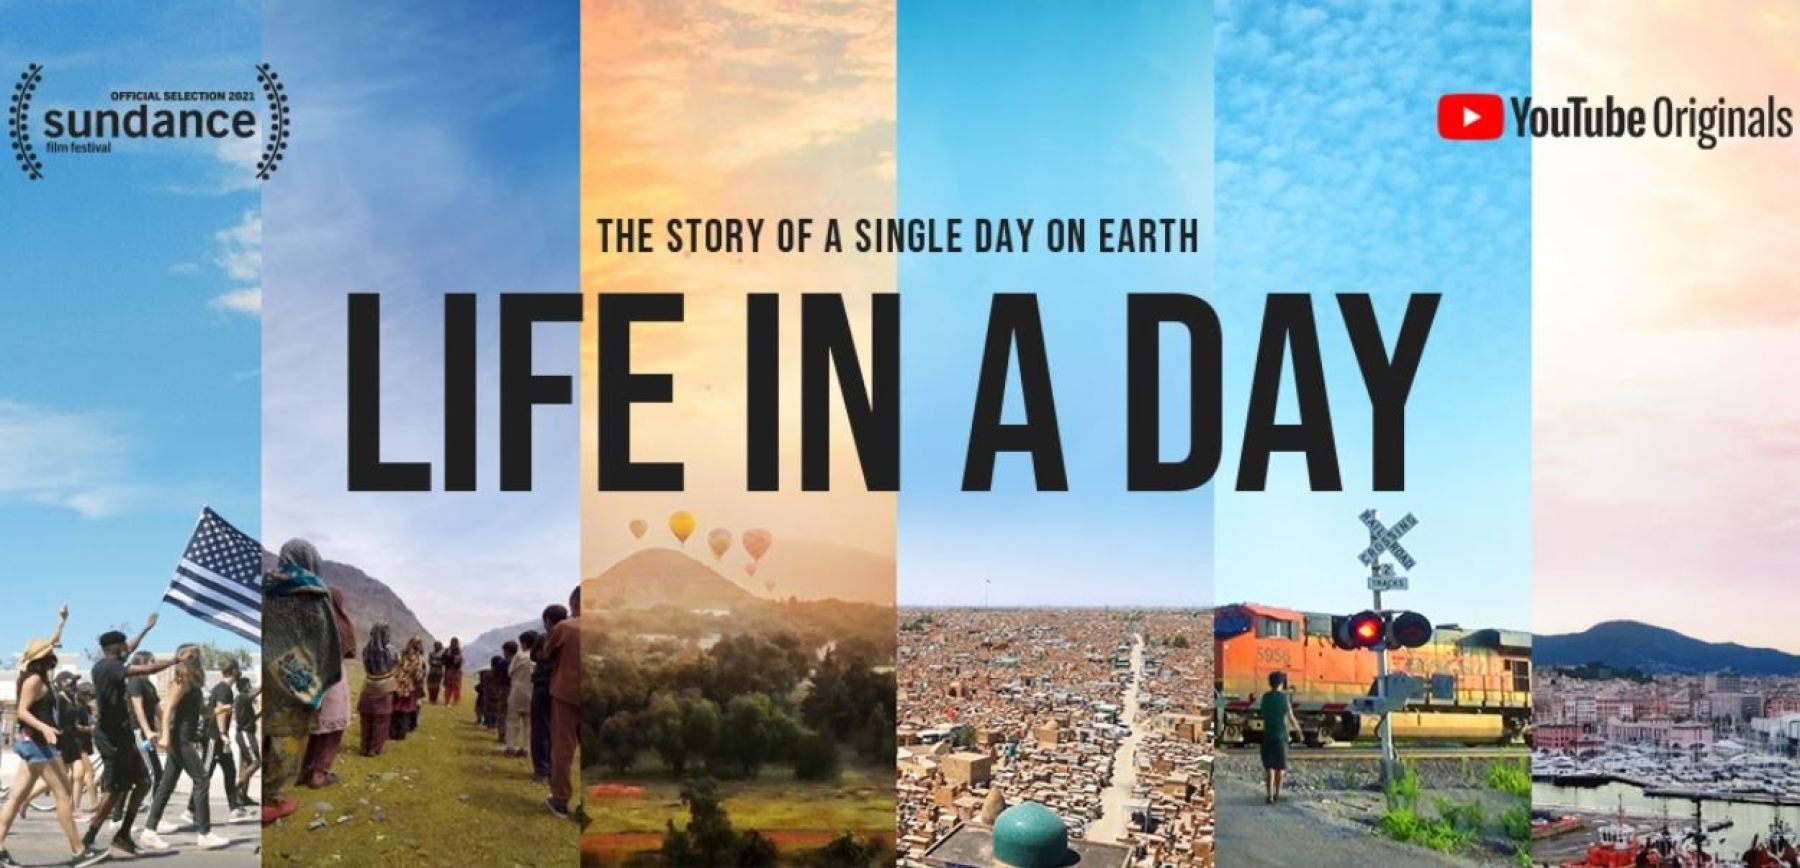 Life in a day 2020 documental Youtube